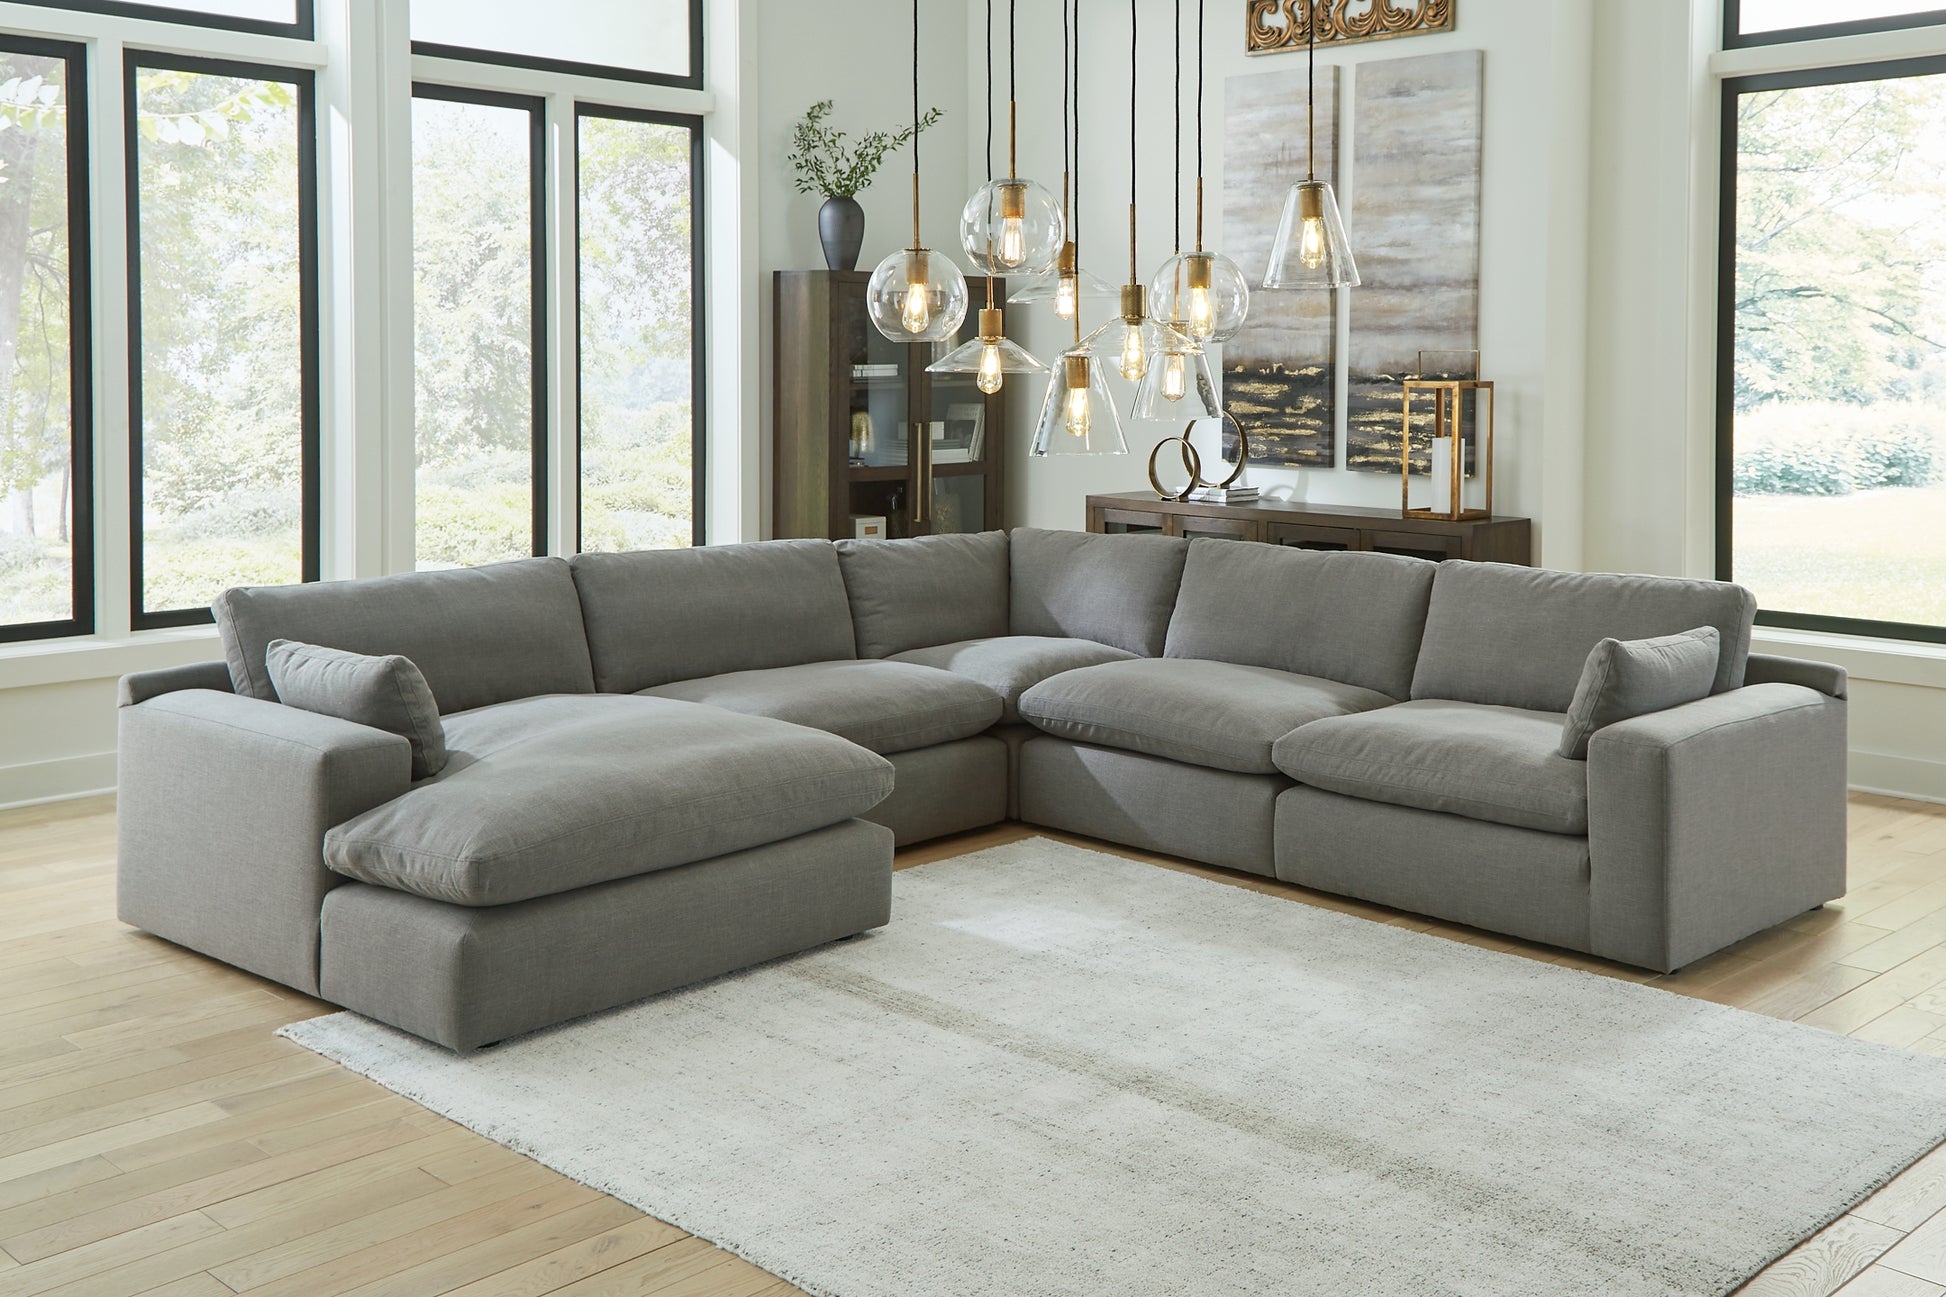 Elyza 5-Piece Sectional with Chaise Wilson Furniture (OH)  in Bridgeport, Ohio. Serving Bridgeport, Yorkville, Bellaire, & Avondale